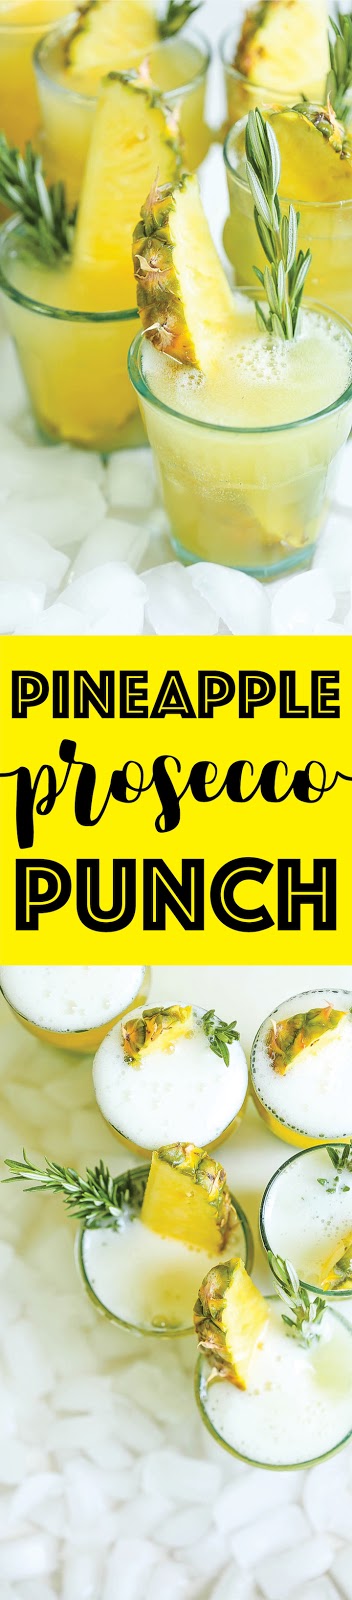 PINEAPPLE PROSECCO PUNCH